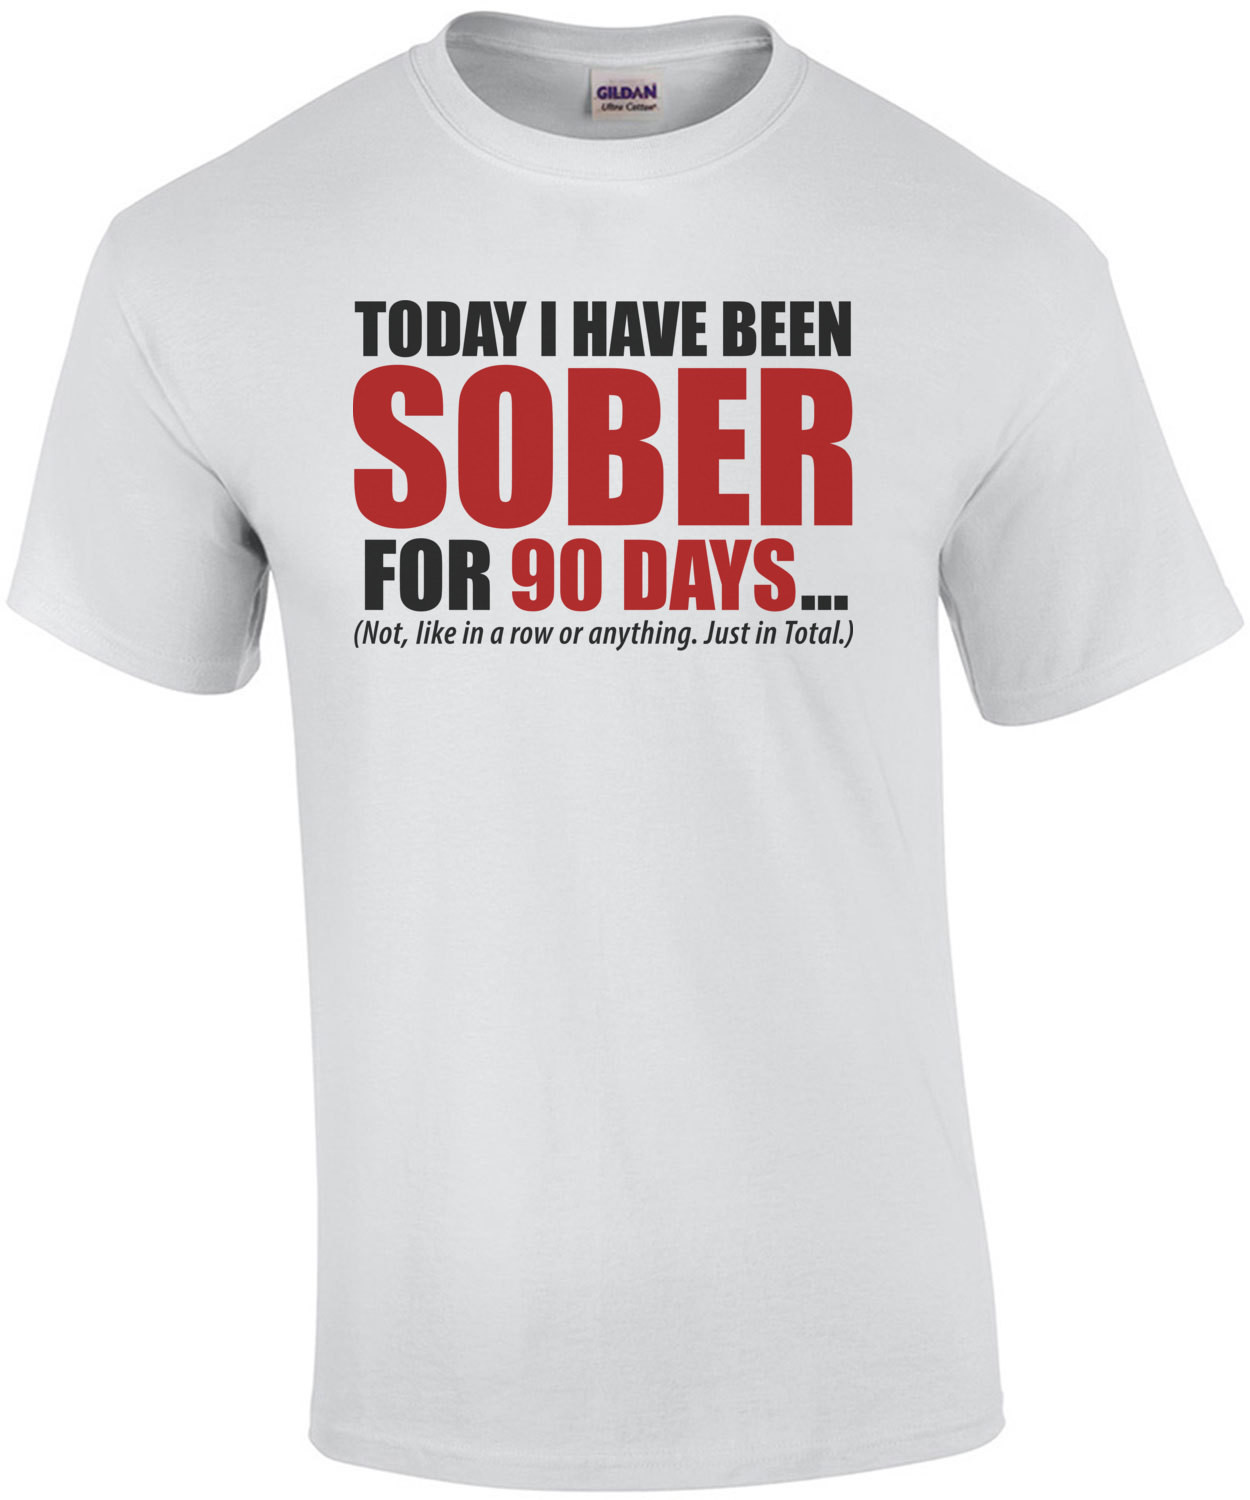 Today I have been sober for 90 days... Not, like in a row or anything. Just in total. Funny drinking t-shirt